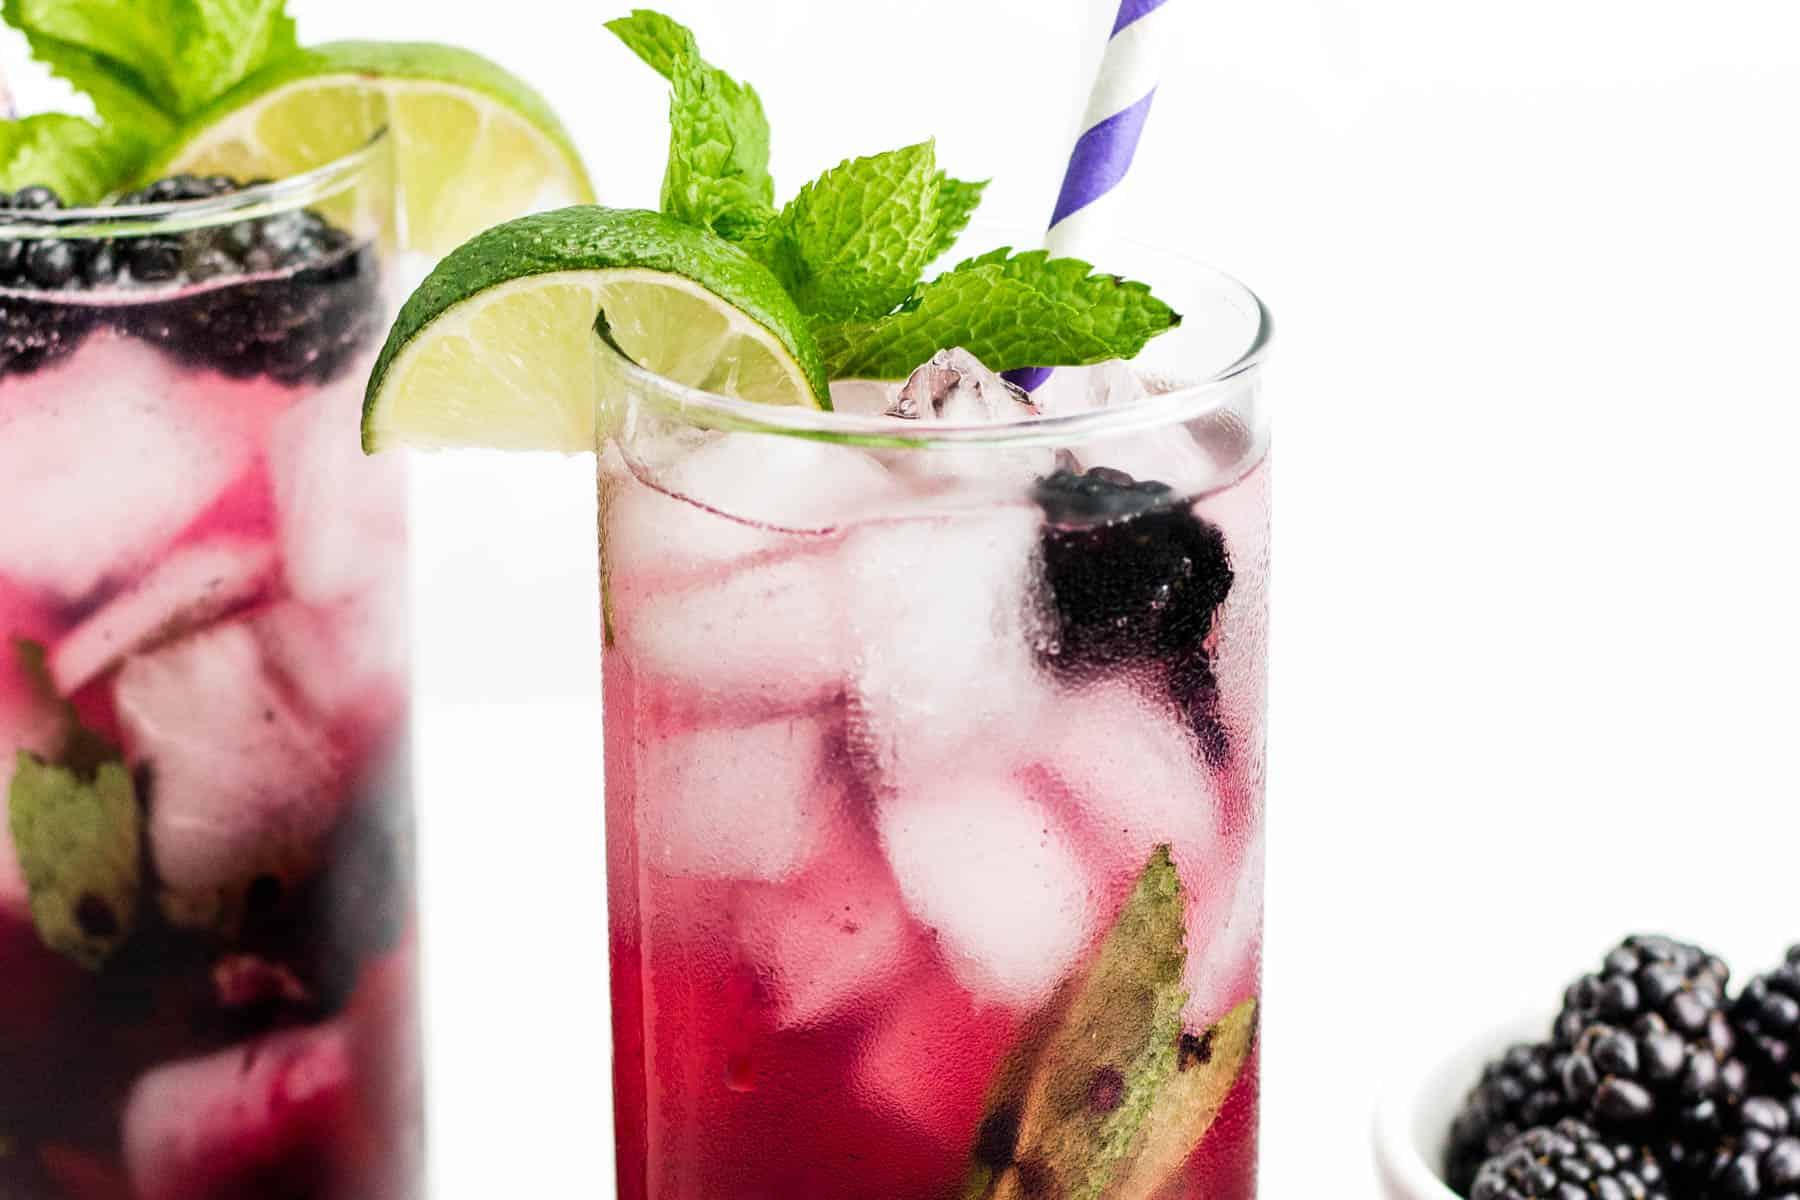 Two mojitos made with blackberries sit side by side next to a bowl of whole berries.